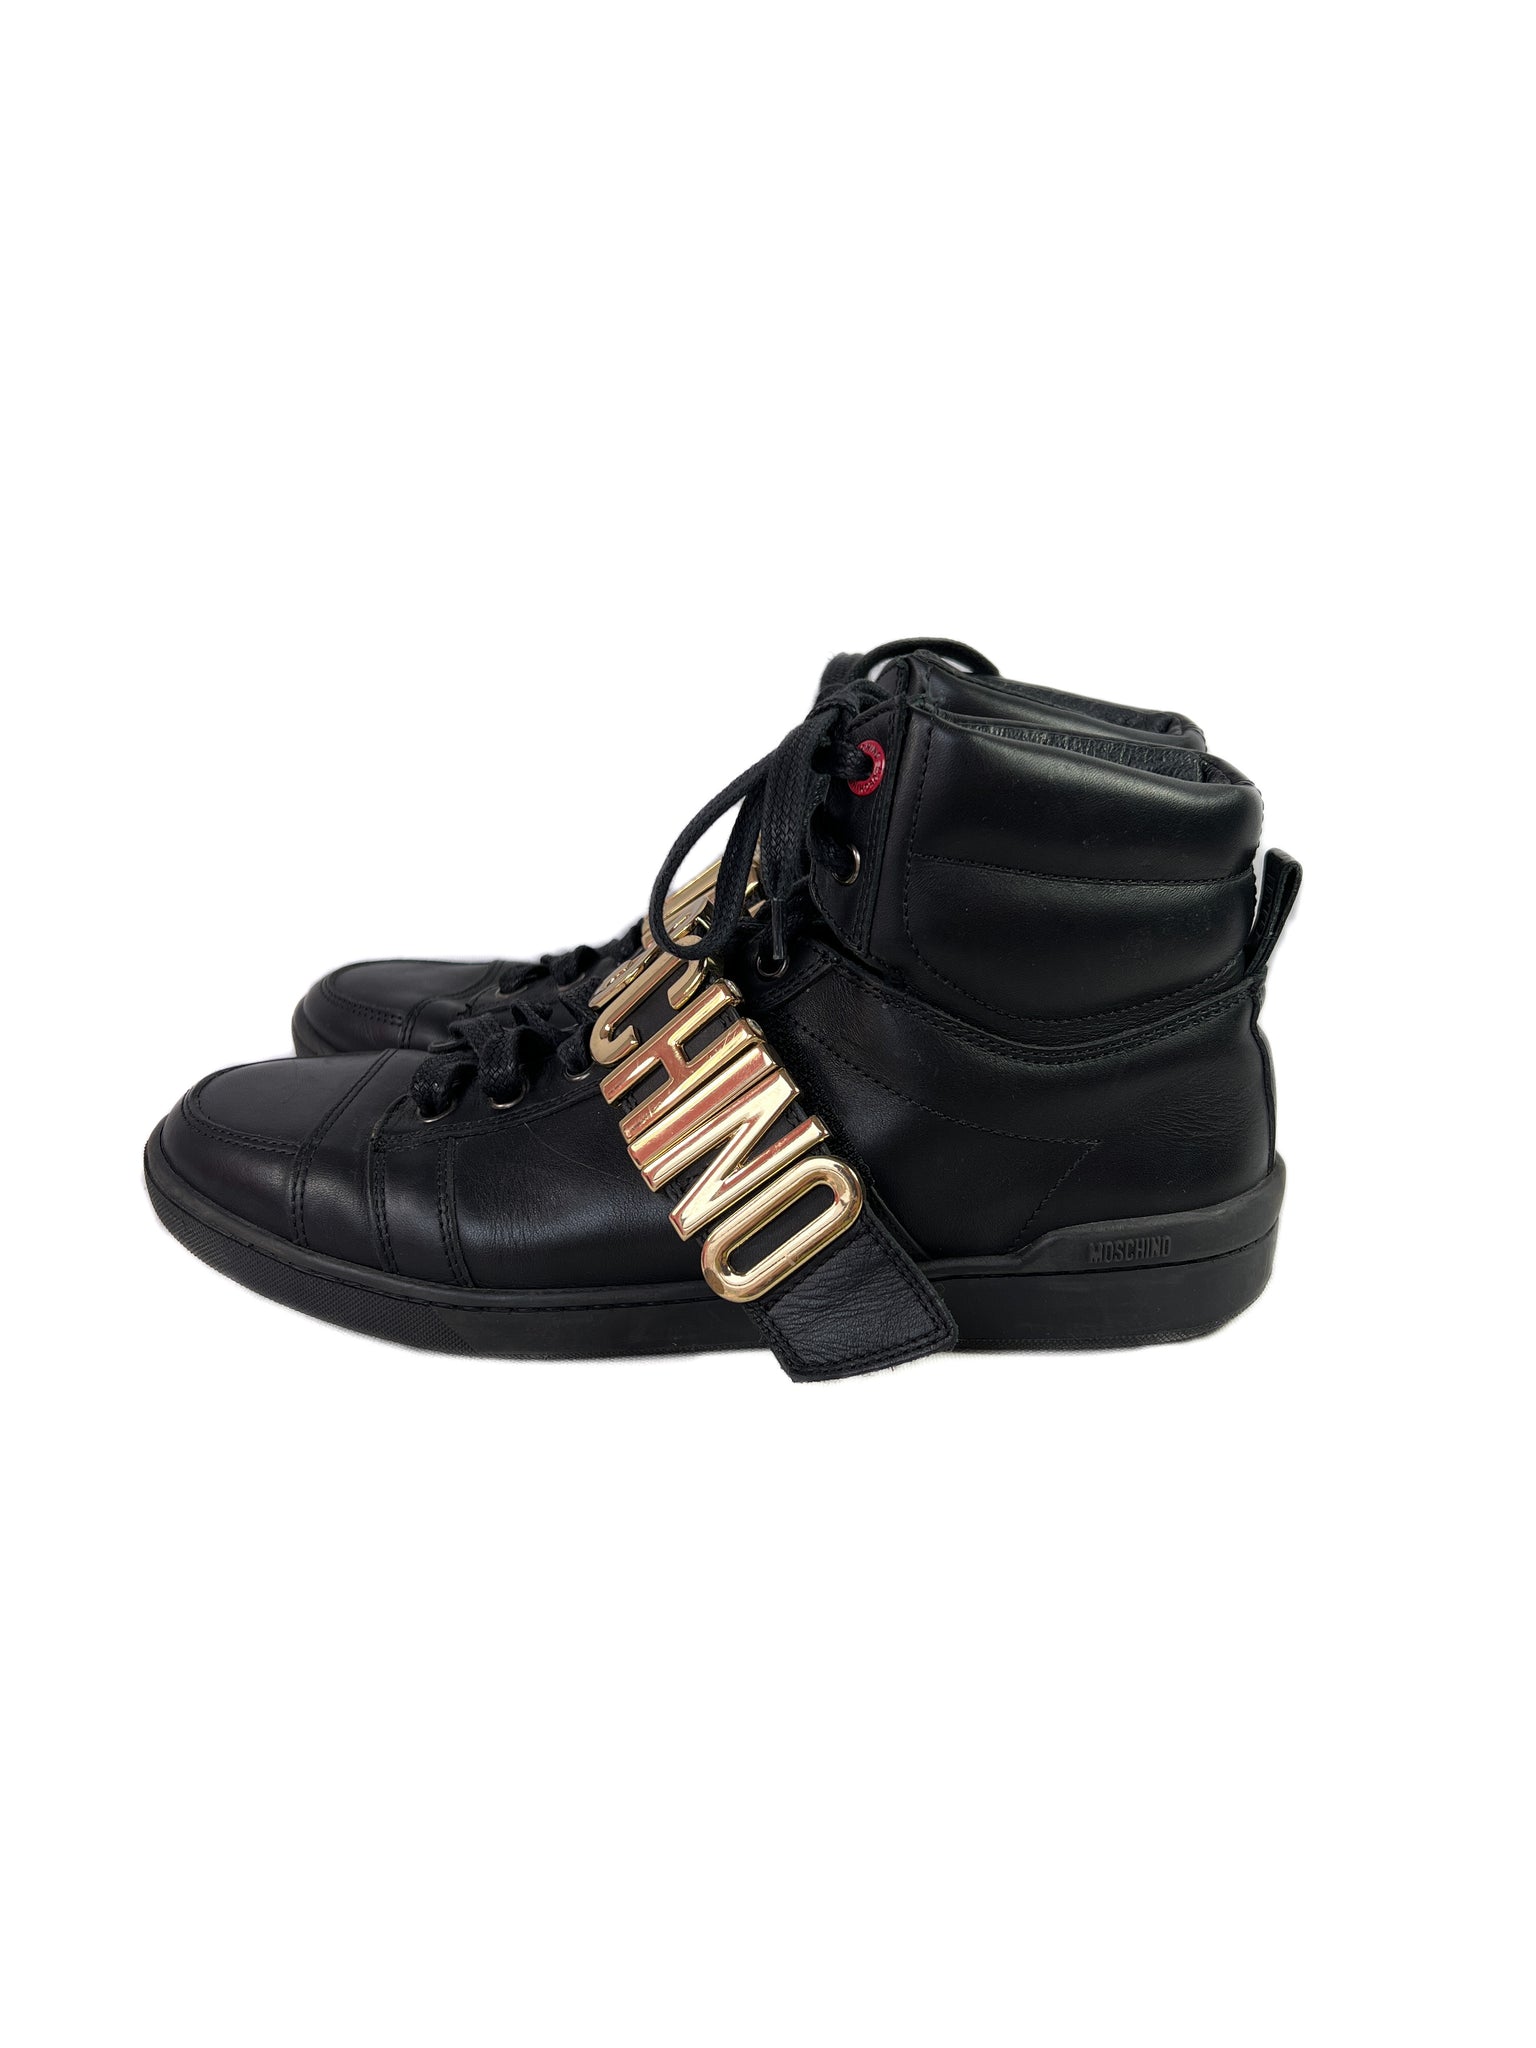 Moschino black leather high top sneakers size 40 – My Girlfriend's Wardrobe  LLC